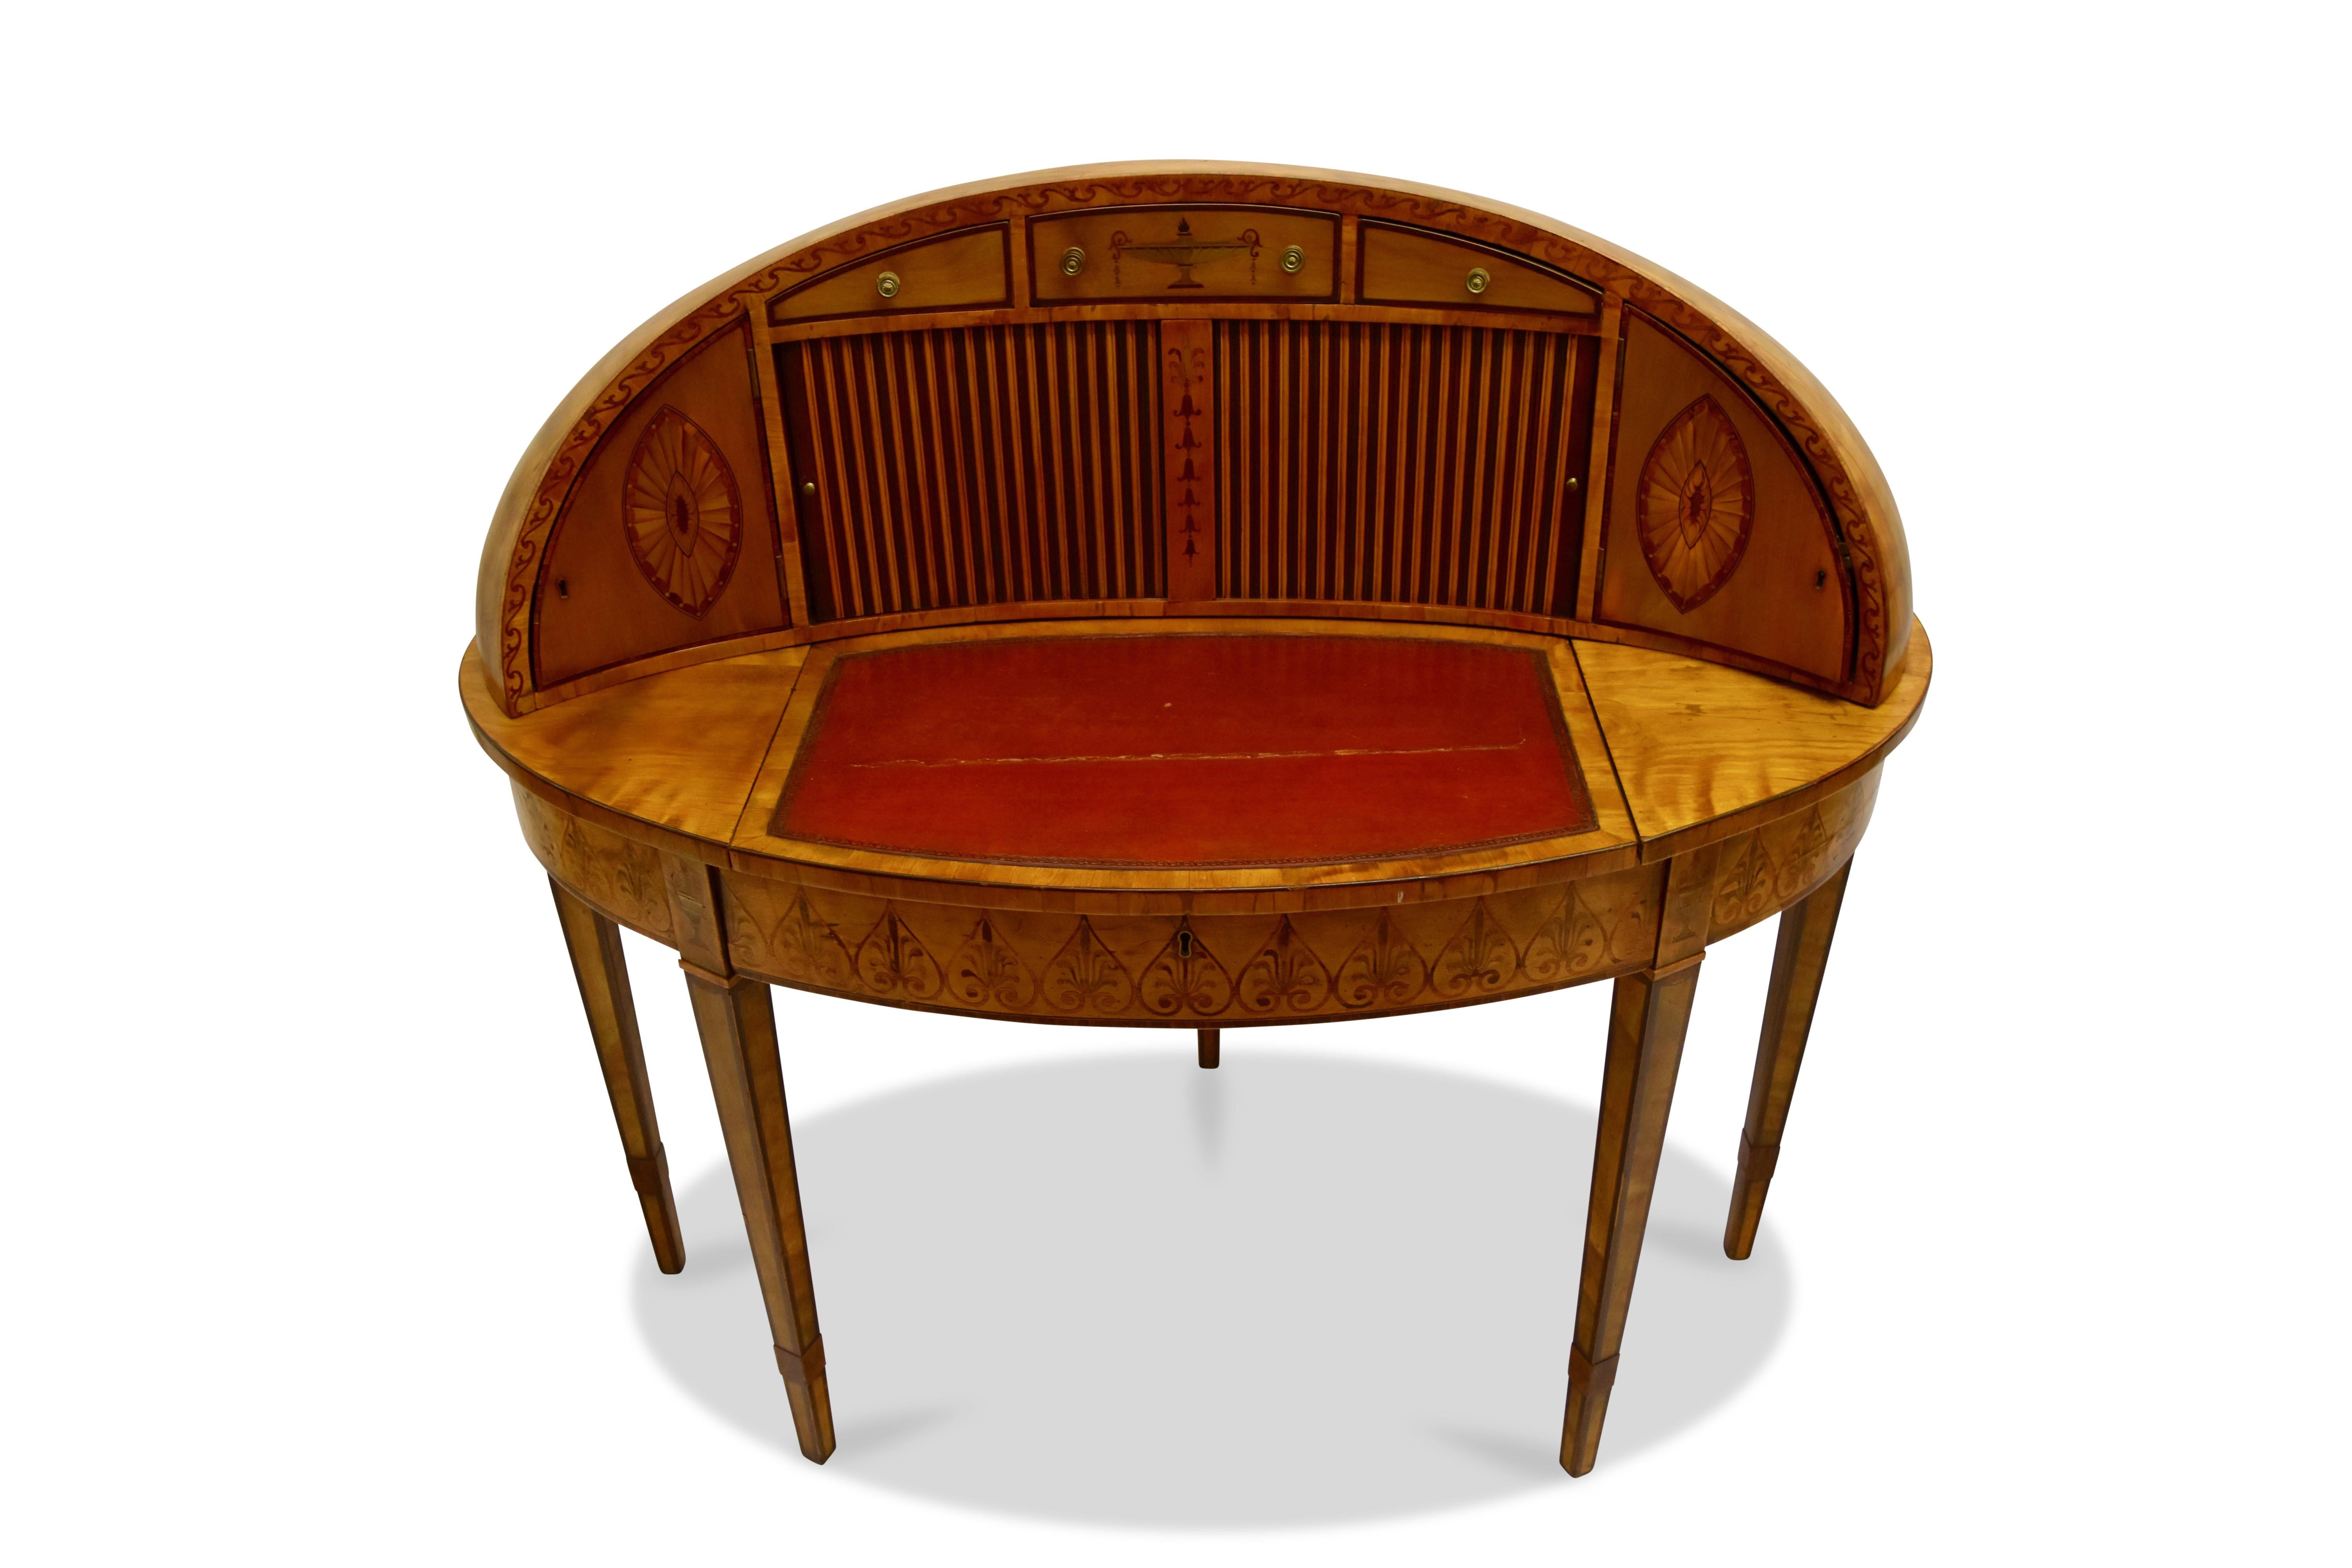 Having a satinwood veneer with fruitwood inlay, the oval shaped top with 3 drawers over a pair of tambour doors opening to reveal a fitted interior, the whole flanked by to doors and resting on an adjustable writing surface with a leather insert,